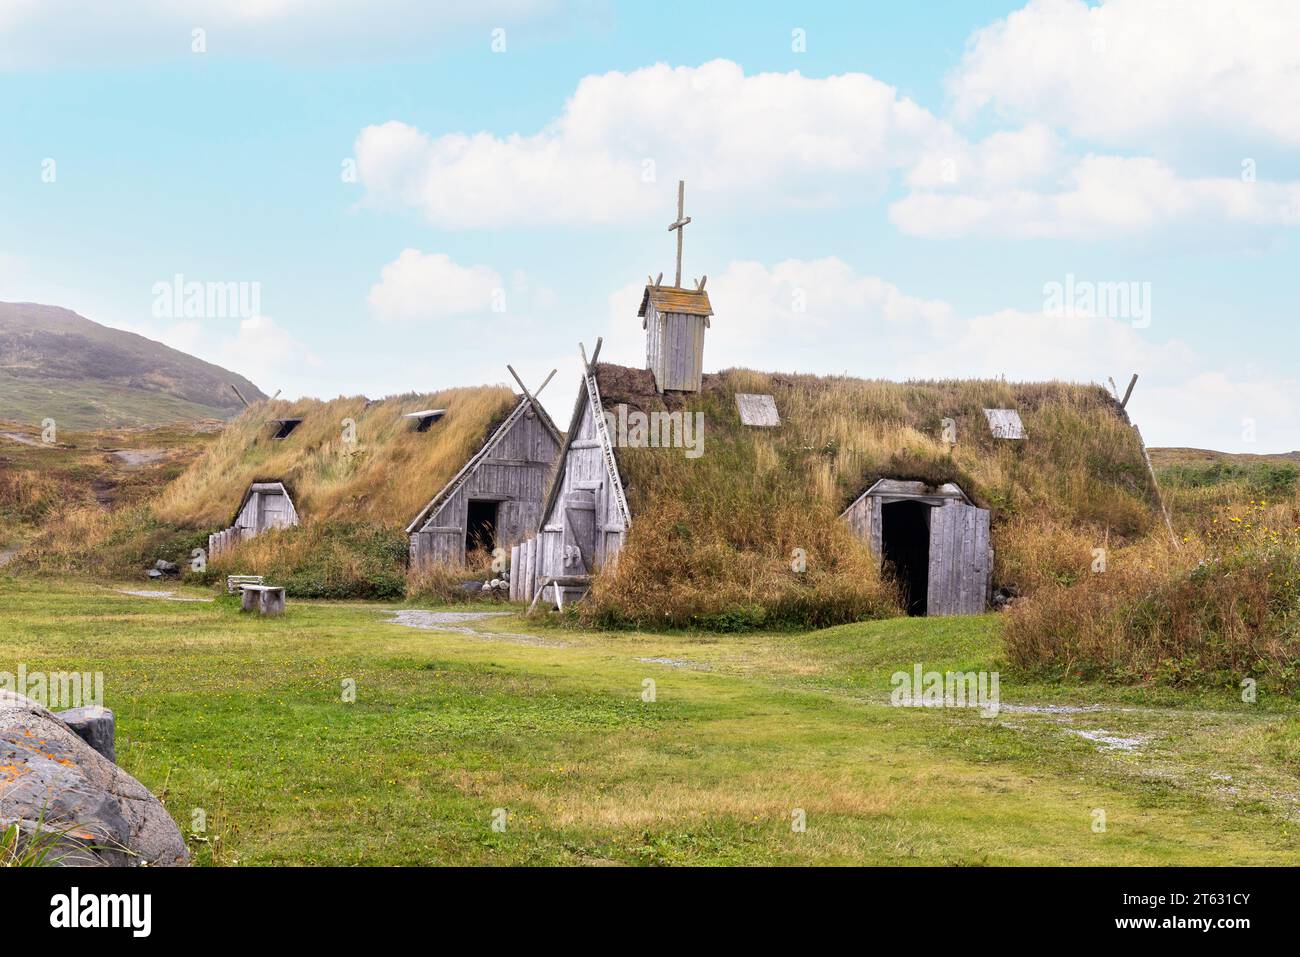 Exterior of reconstructed buildings and church, L'Anse aux Meadows UNESCO site, viking/norse settlement of a thousand years ago, Newfoundland Canada. Stock Photo